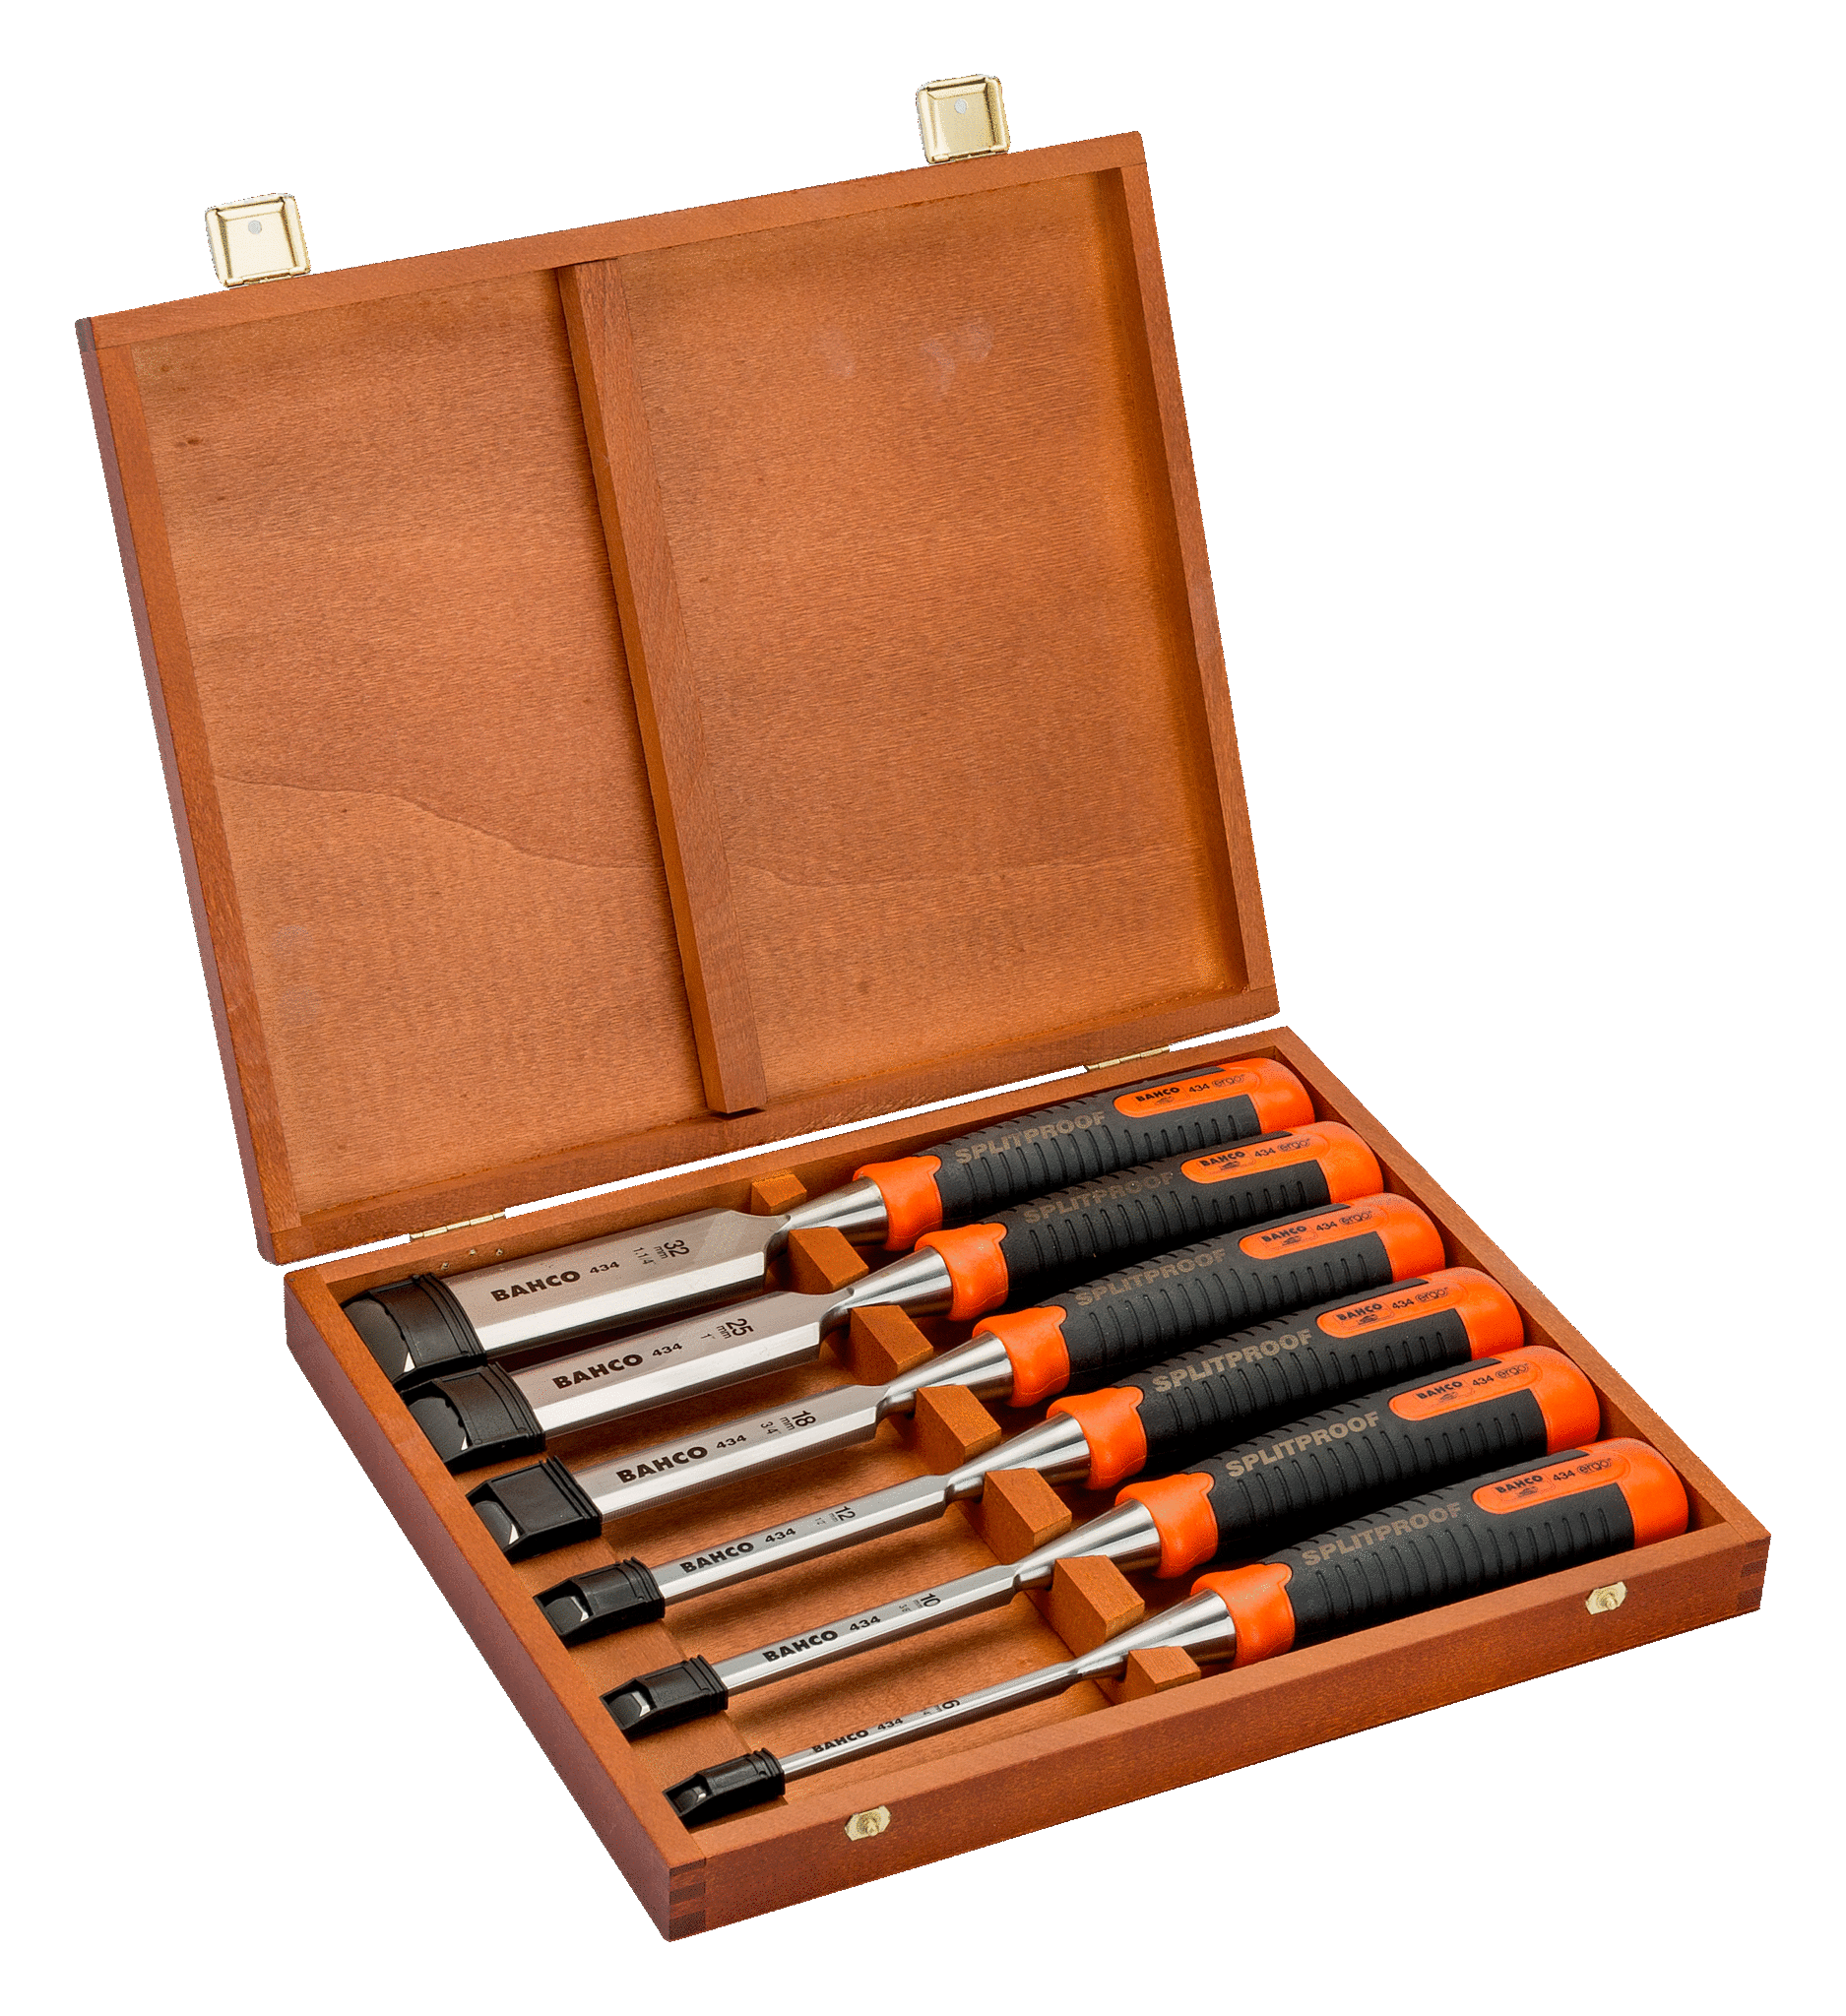 NEIKO TOOLS  9pc WOOD WORKING CHISEL SET CR-V 1/4" TO 1-1/2" EXTRA LONG HANDLE